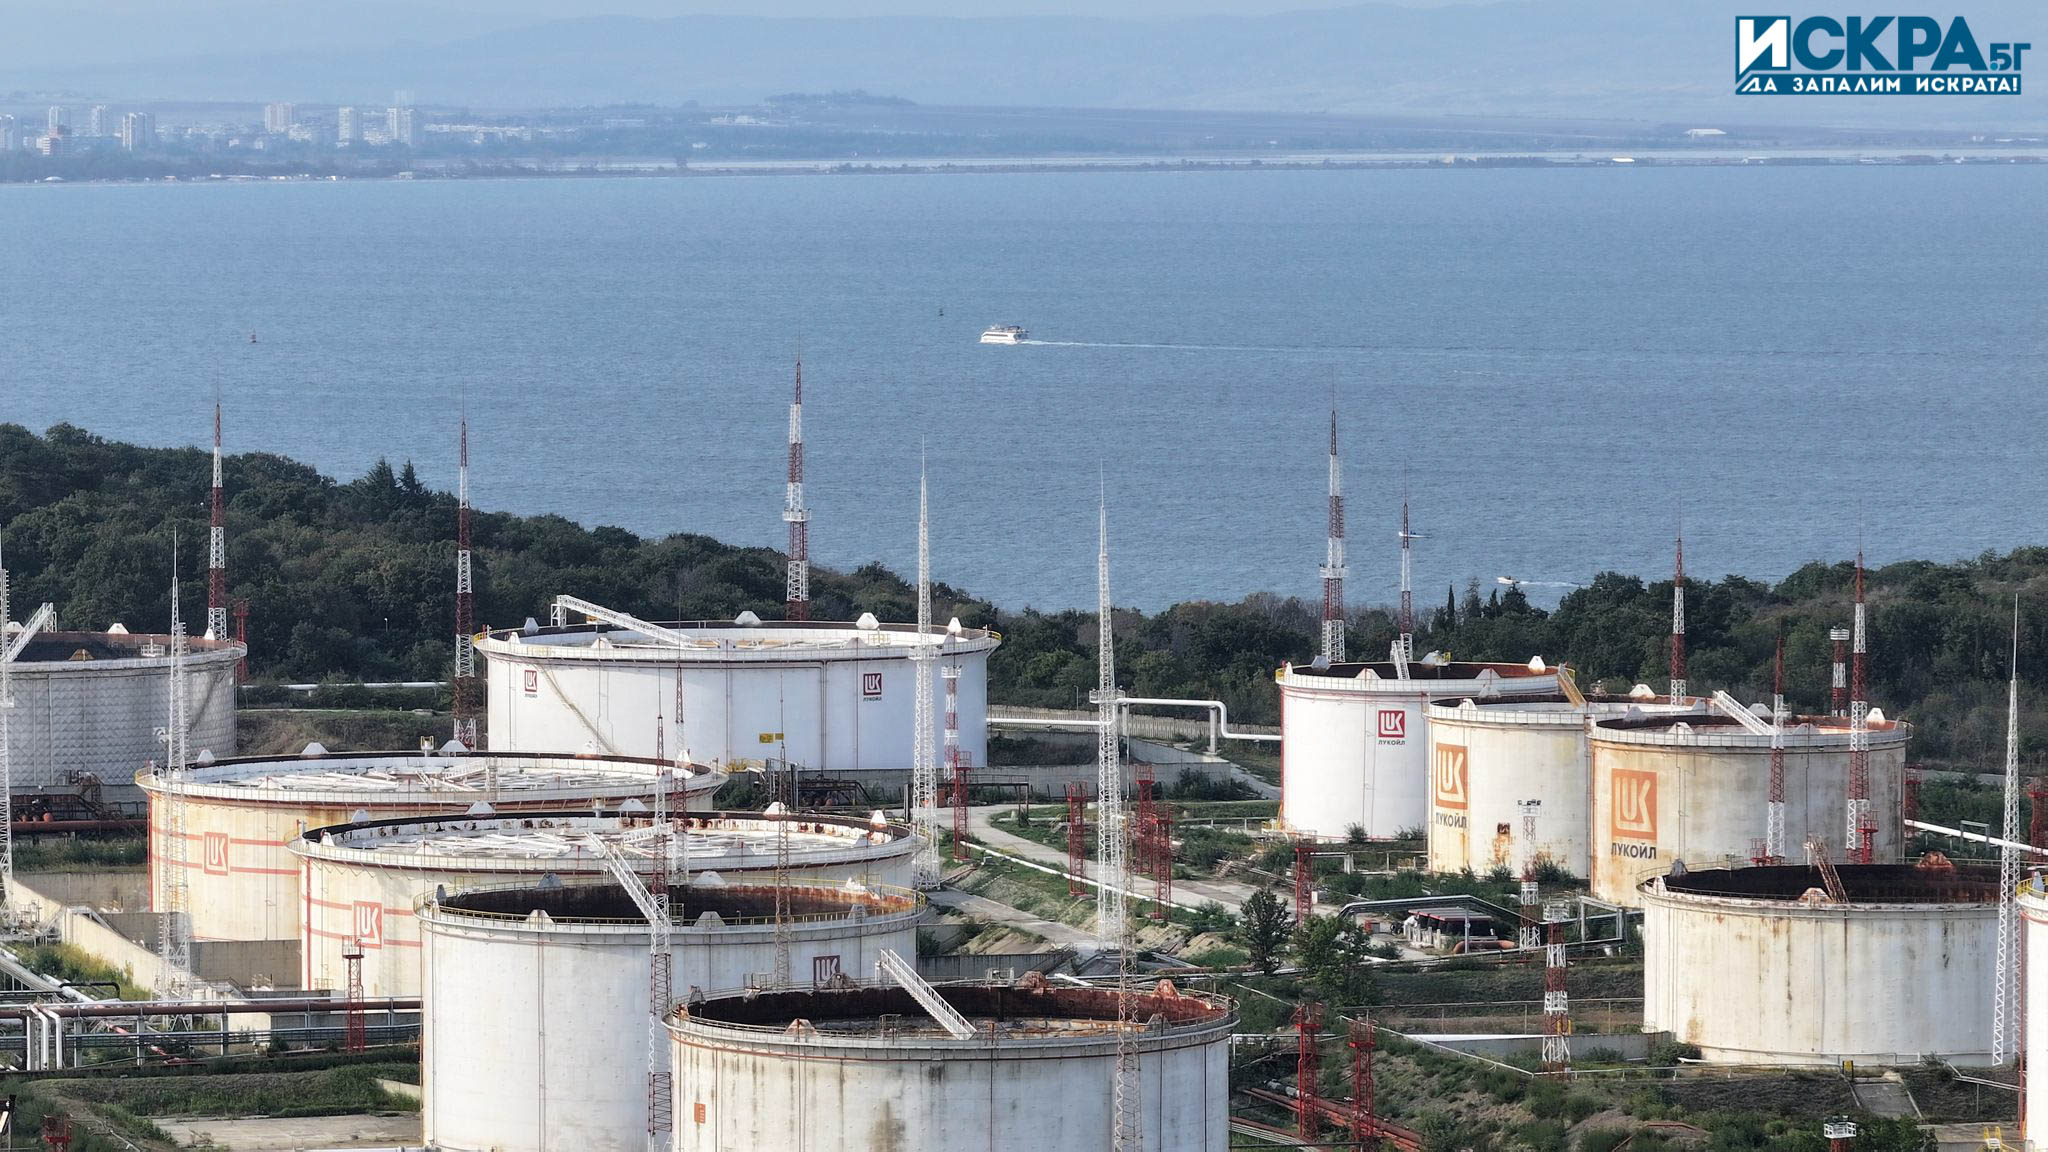 Insaoil will buy the refinery of Lukoil in Burgas This